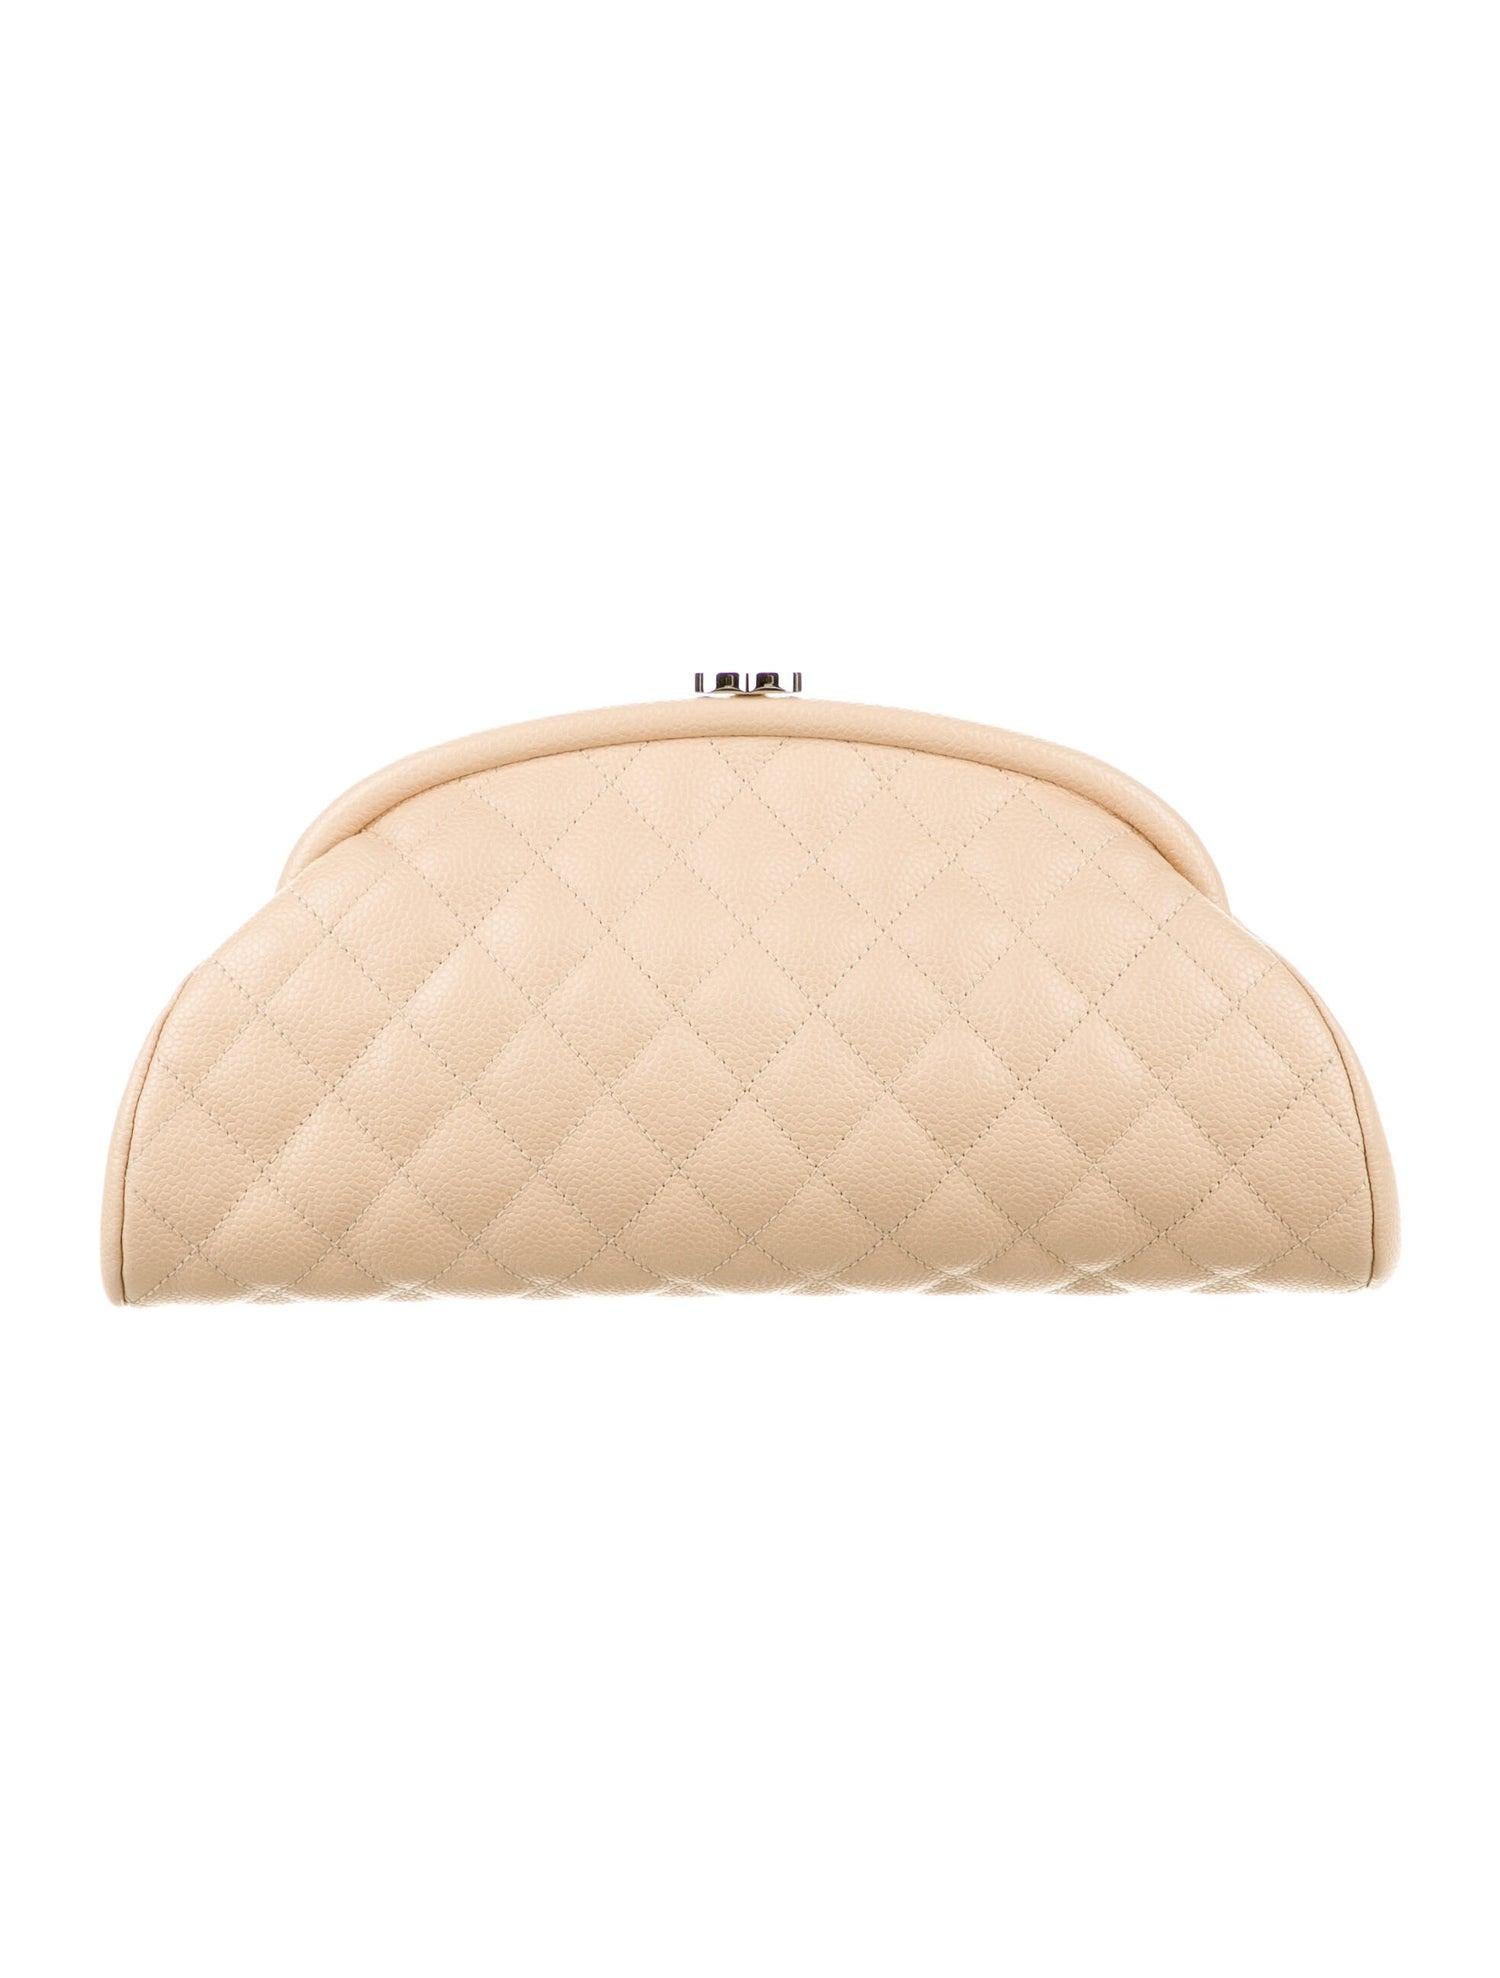 Chanel Classic Vintage Beige CC Diamond Quilted Caviar Timeless Clutch

This stylish clutch is beautifully crafted of beige diamond quilted caviar leather. The clutch features a polished silver kiss lock in the form of a Chanel CC logo that opens to